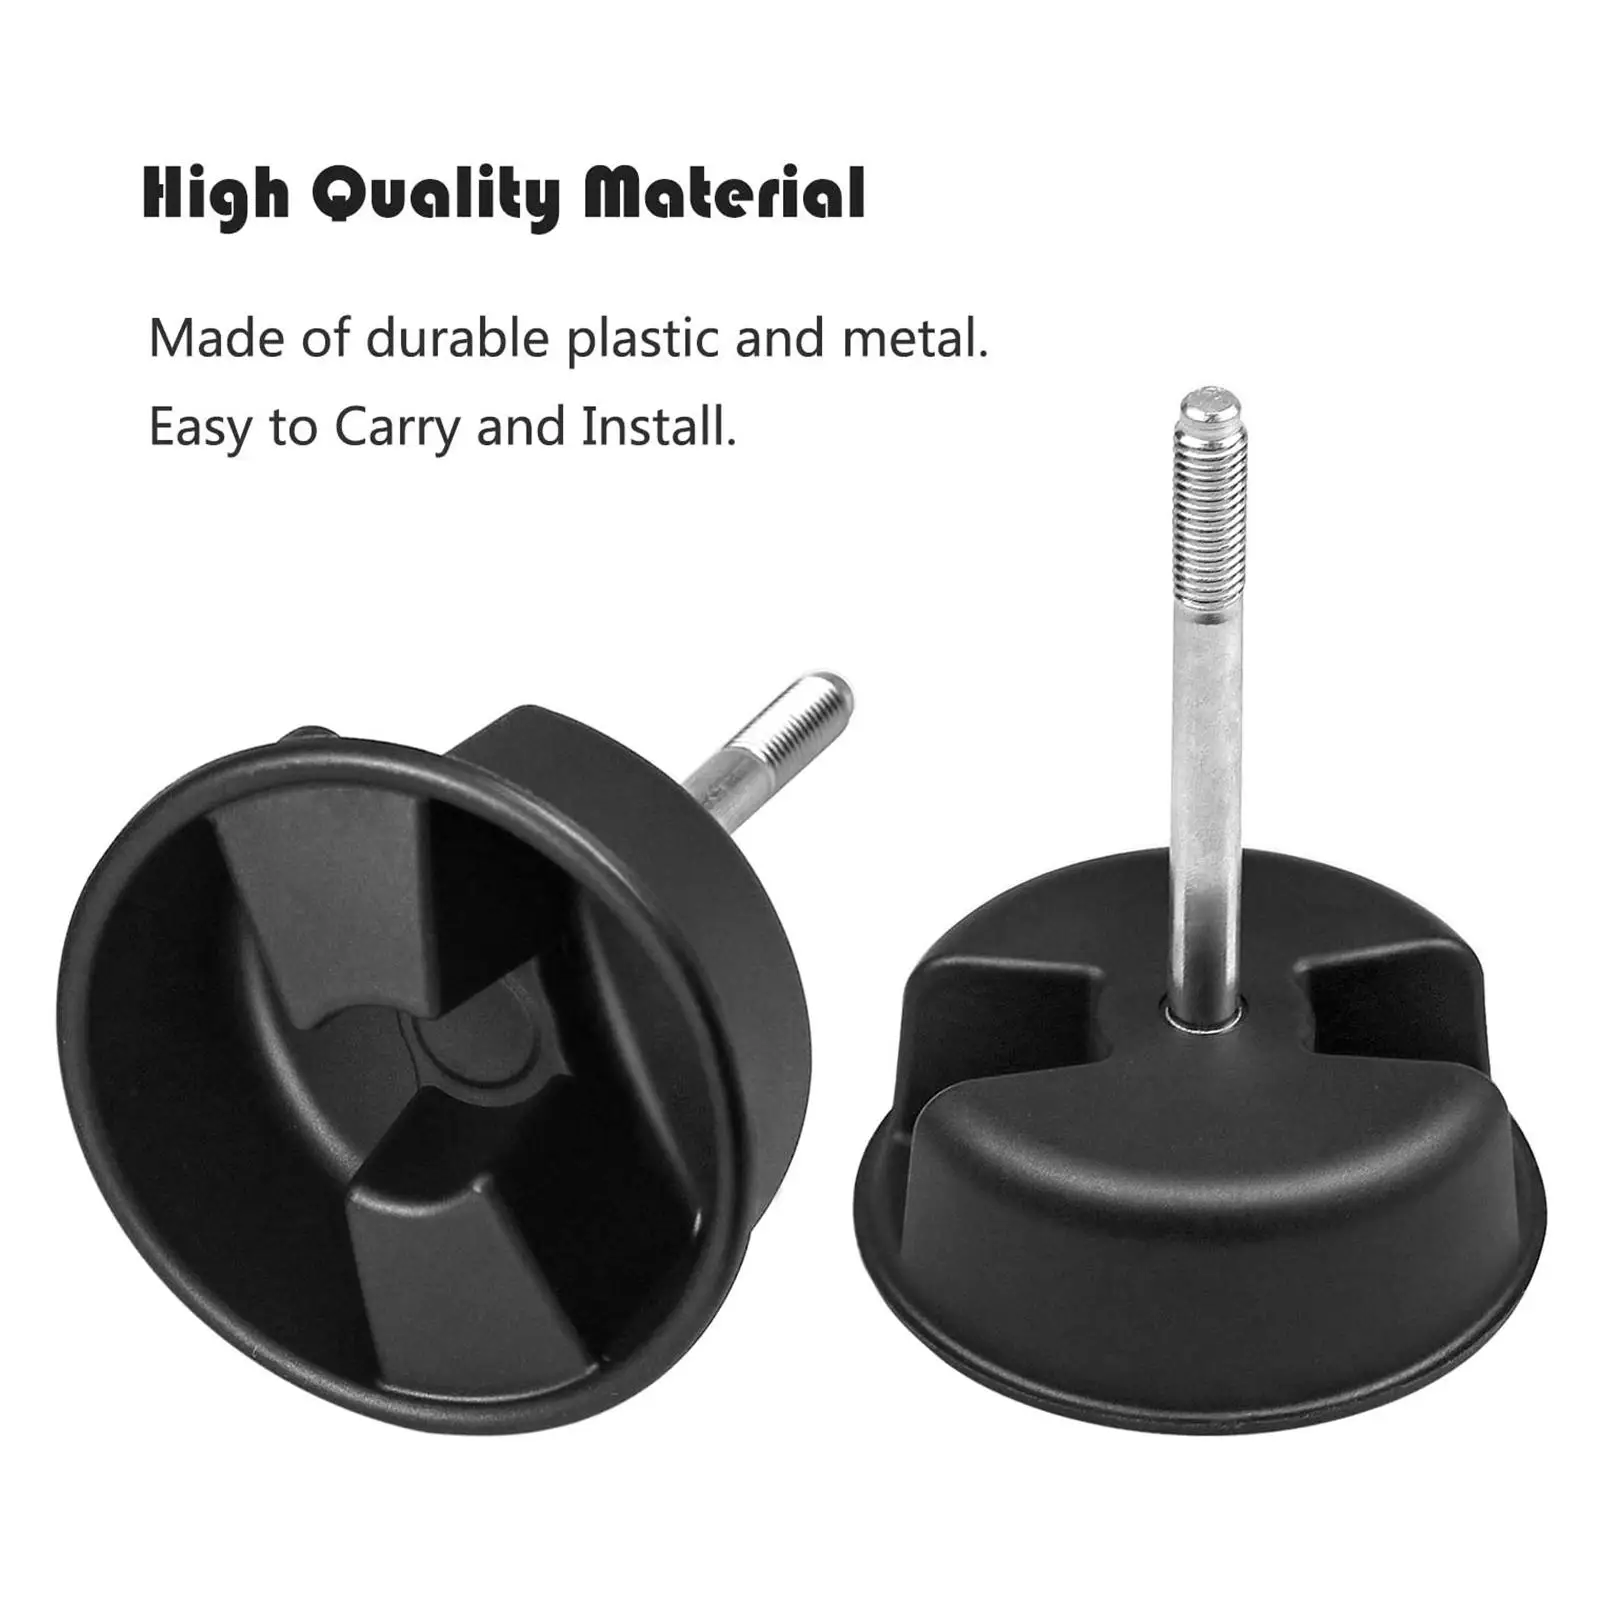 Hardtop Panel Mounting Screw Knob Replacement for Jeep Wrangler JK 2dr 2007-2018